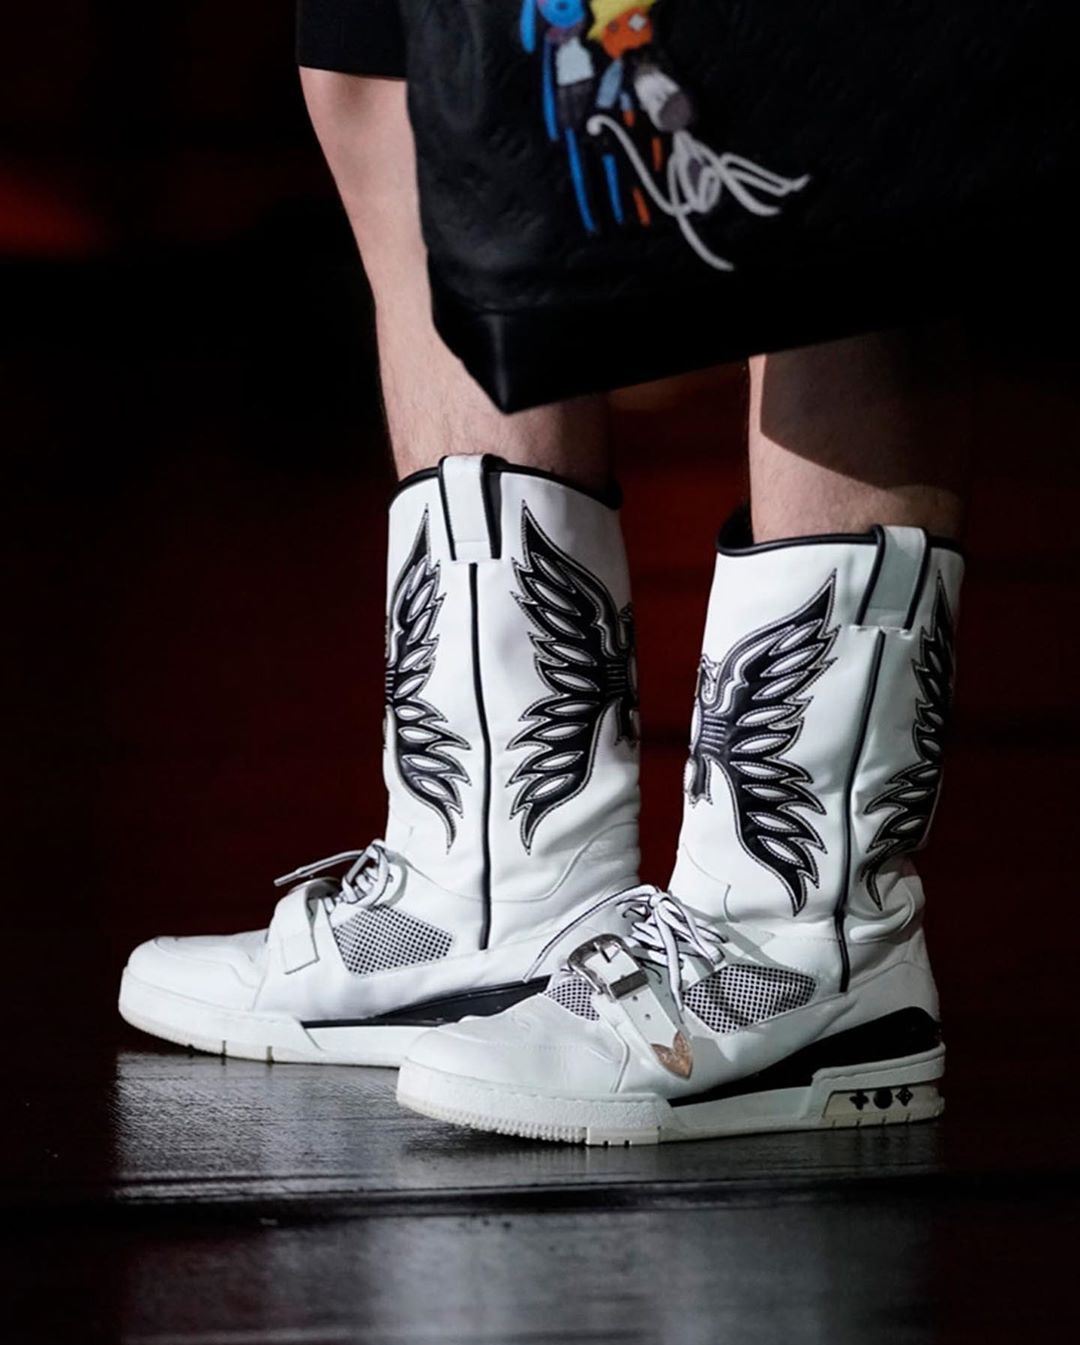 HYPEBEAST on X: #LouisVuitton unveiled its cowboy boot-inspired sneaker  during its Spring/Summer 2021 runway show. The silhouette features the LV  408 Trainer tooling under a phoenix-printed leather cowboy boot upper. Stay  tuned